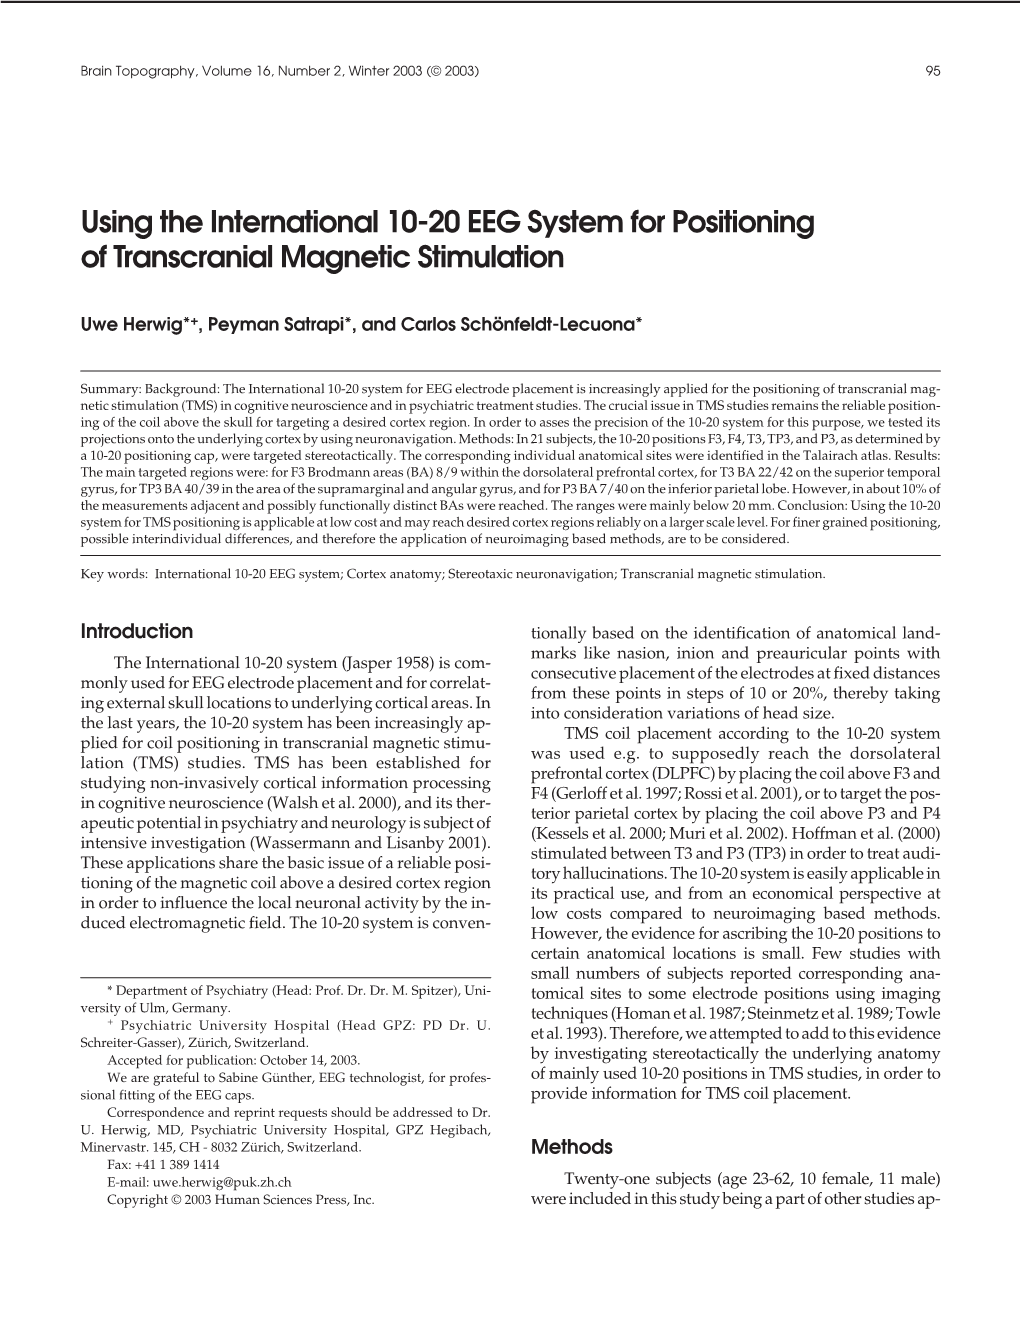 Using the International 10-20 EEG System for Positioning of Transcranial Magnetic Stimulation